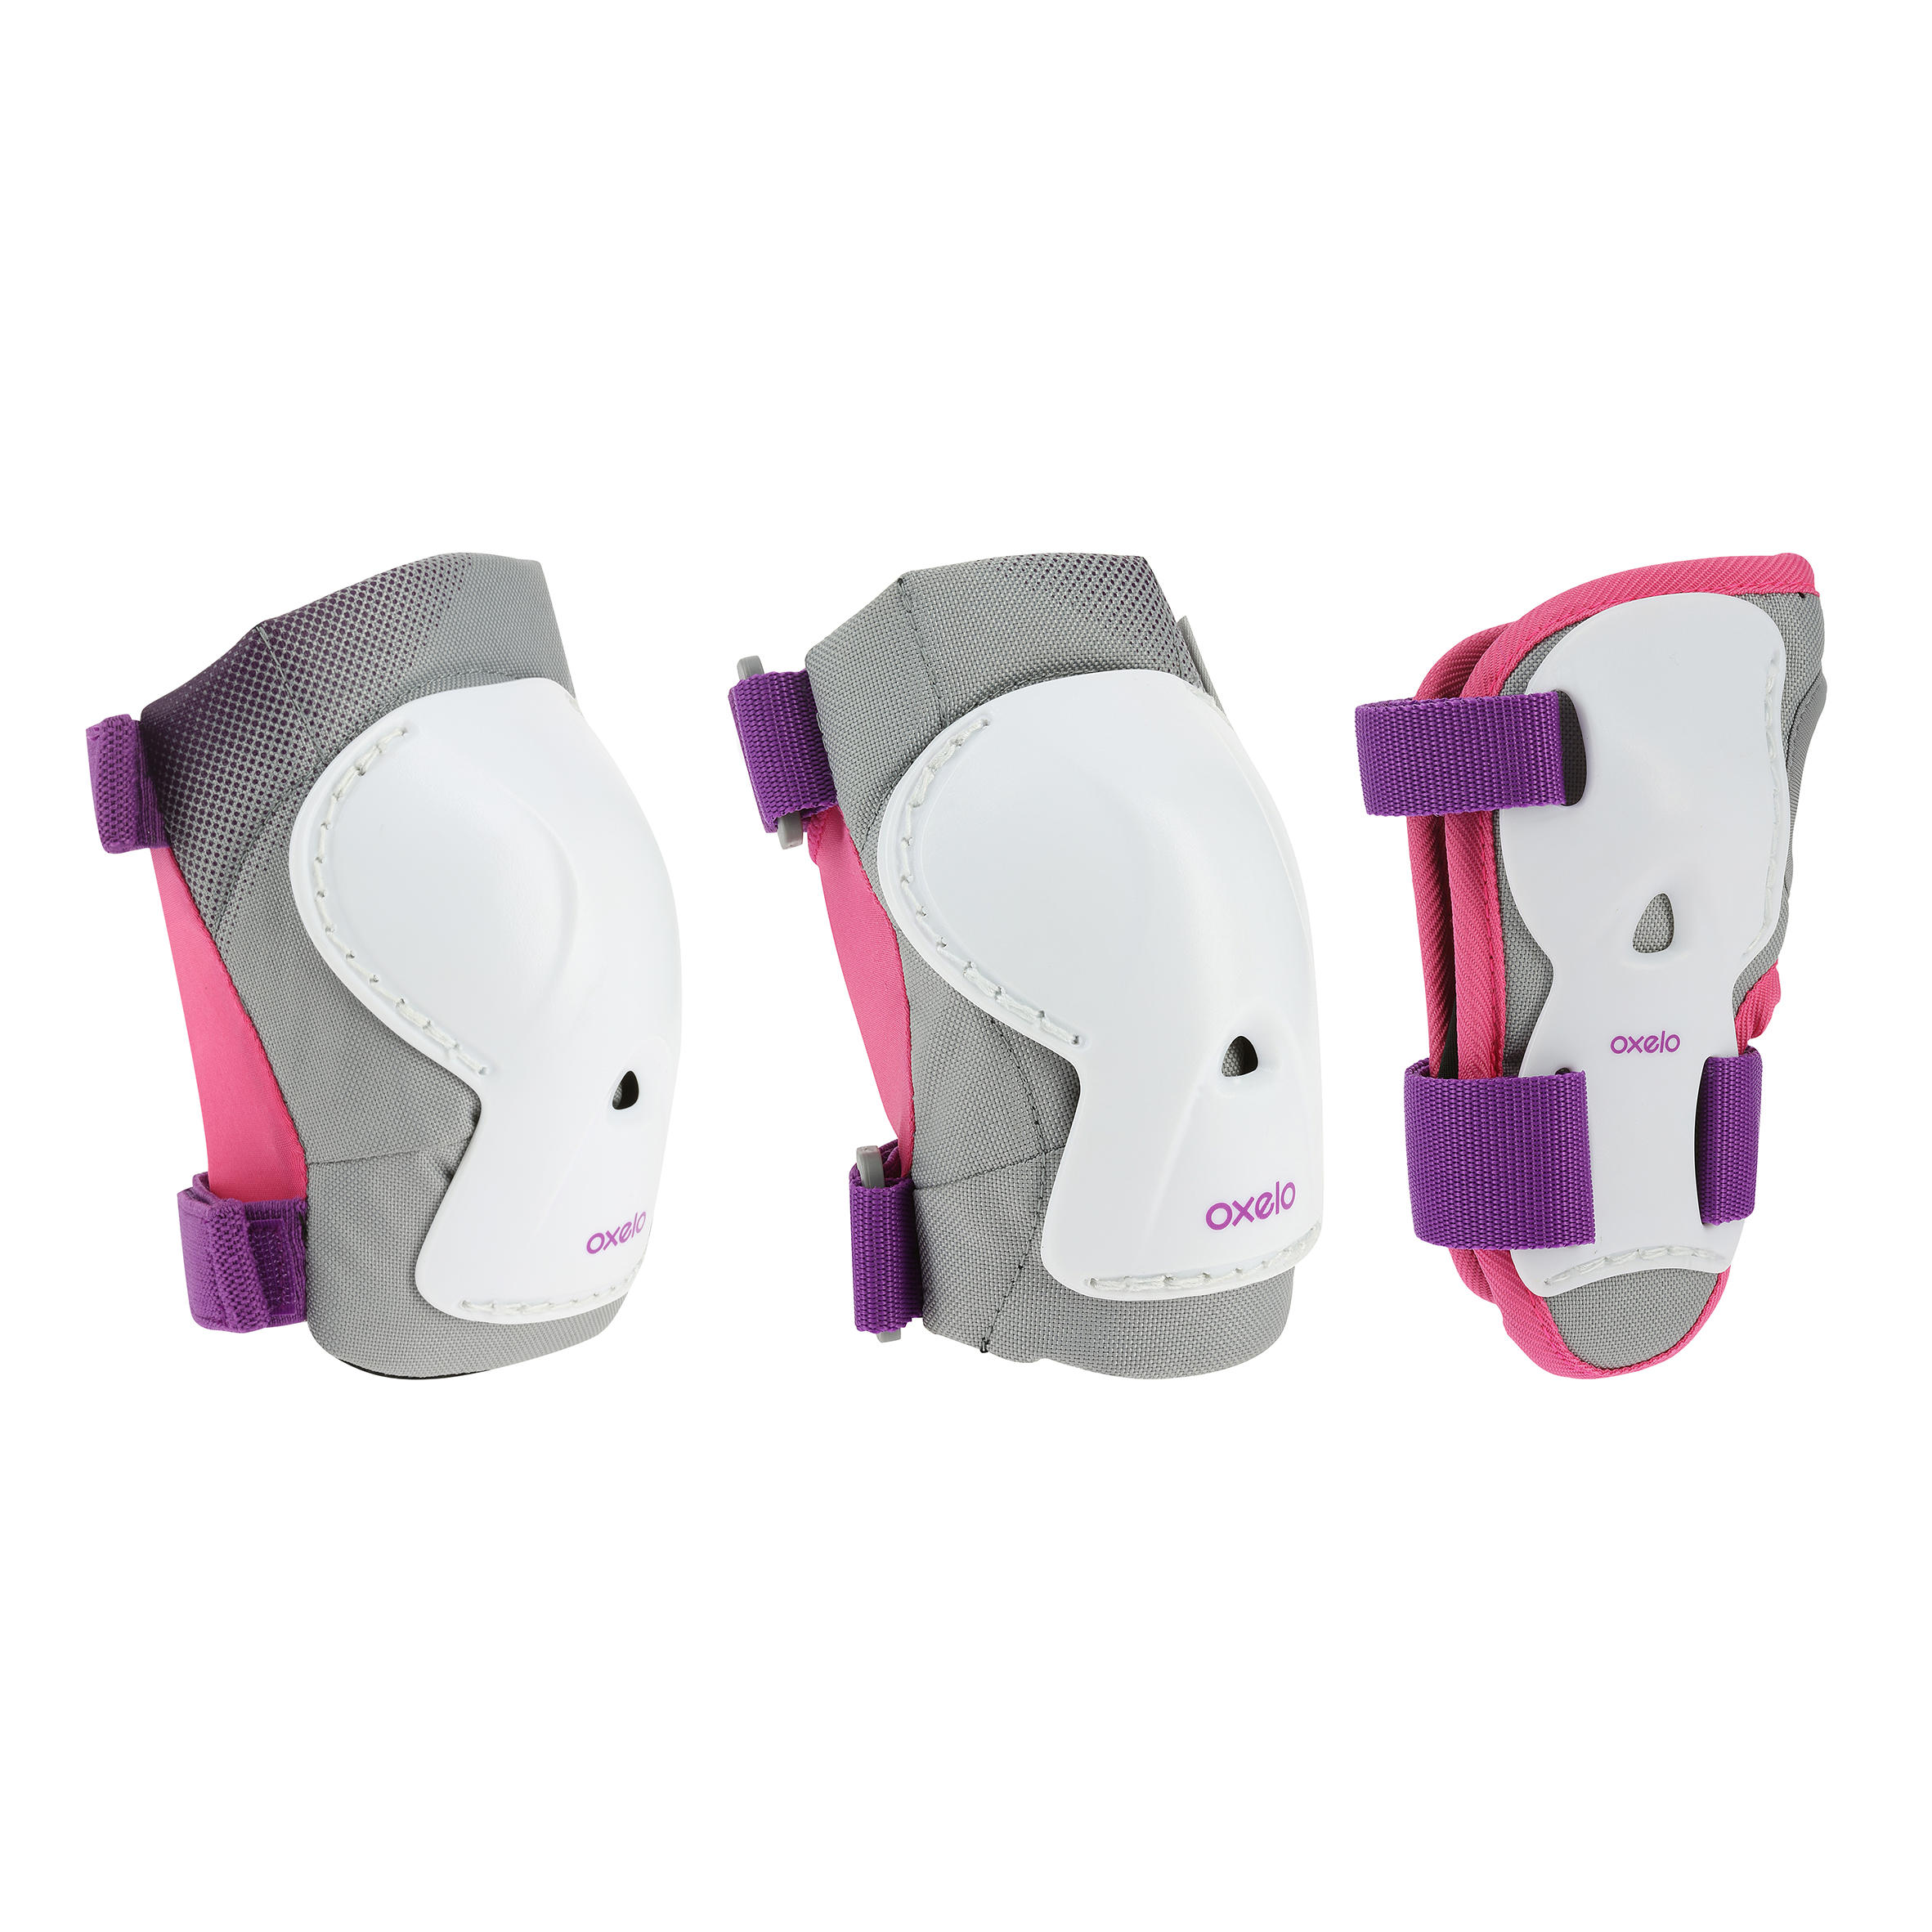 Play Kids' 3-Piece Skating Skateboarding Scooter Protective Gear - Purple 1/9